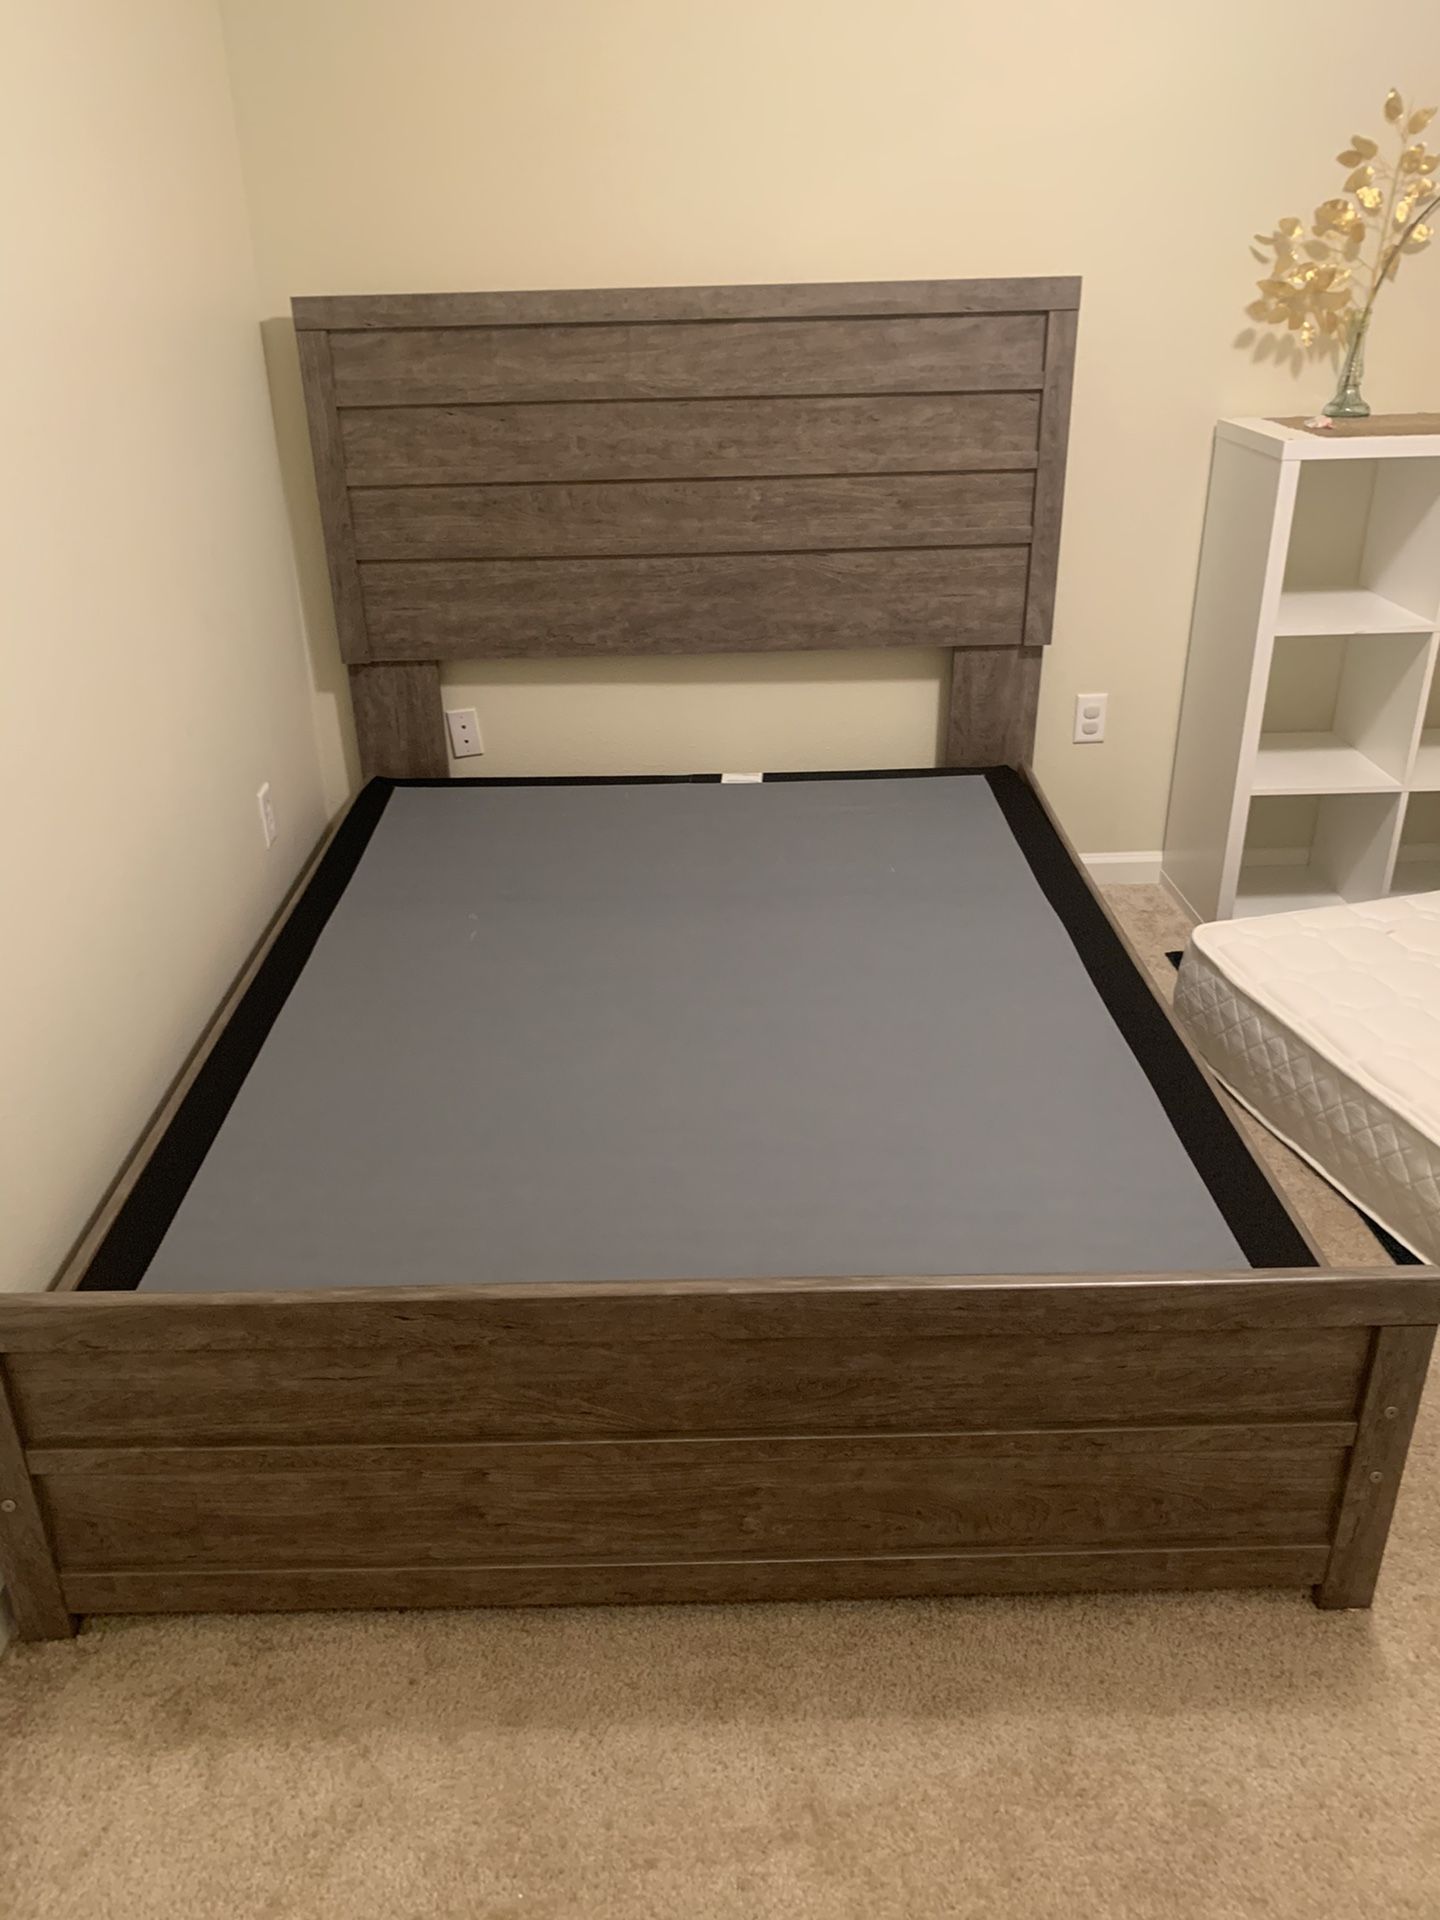 Queen bed frame and box